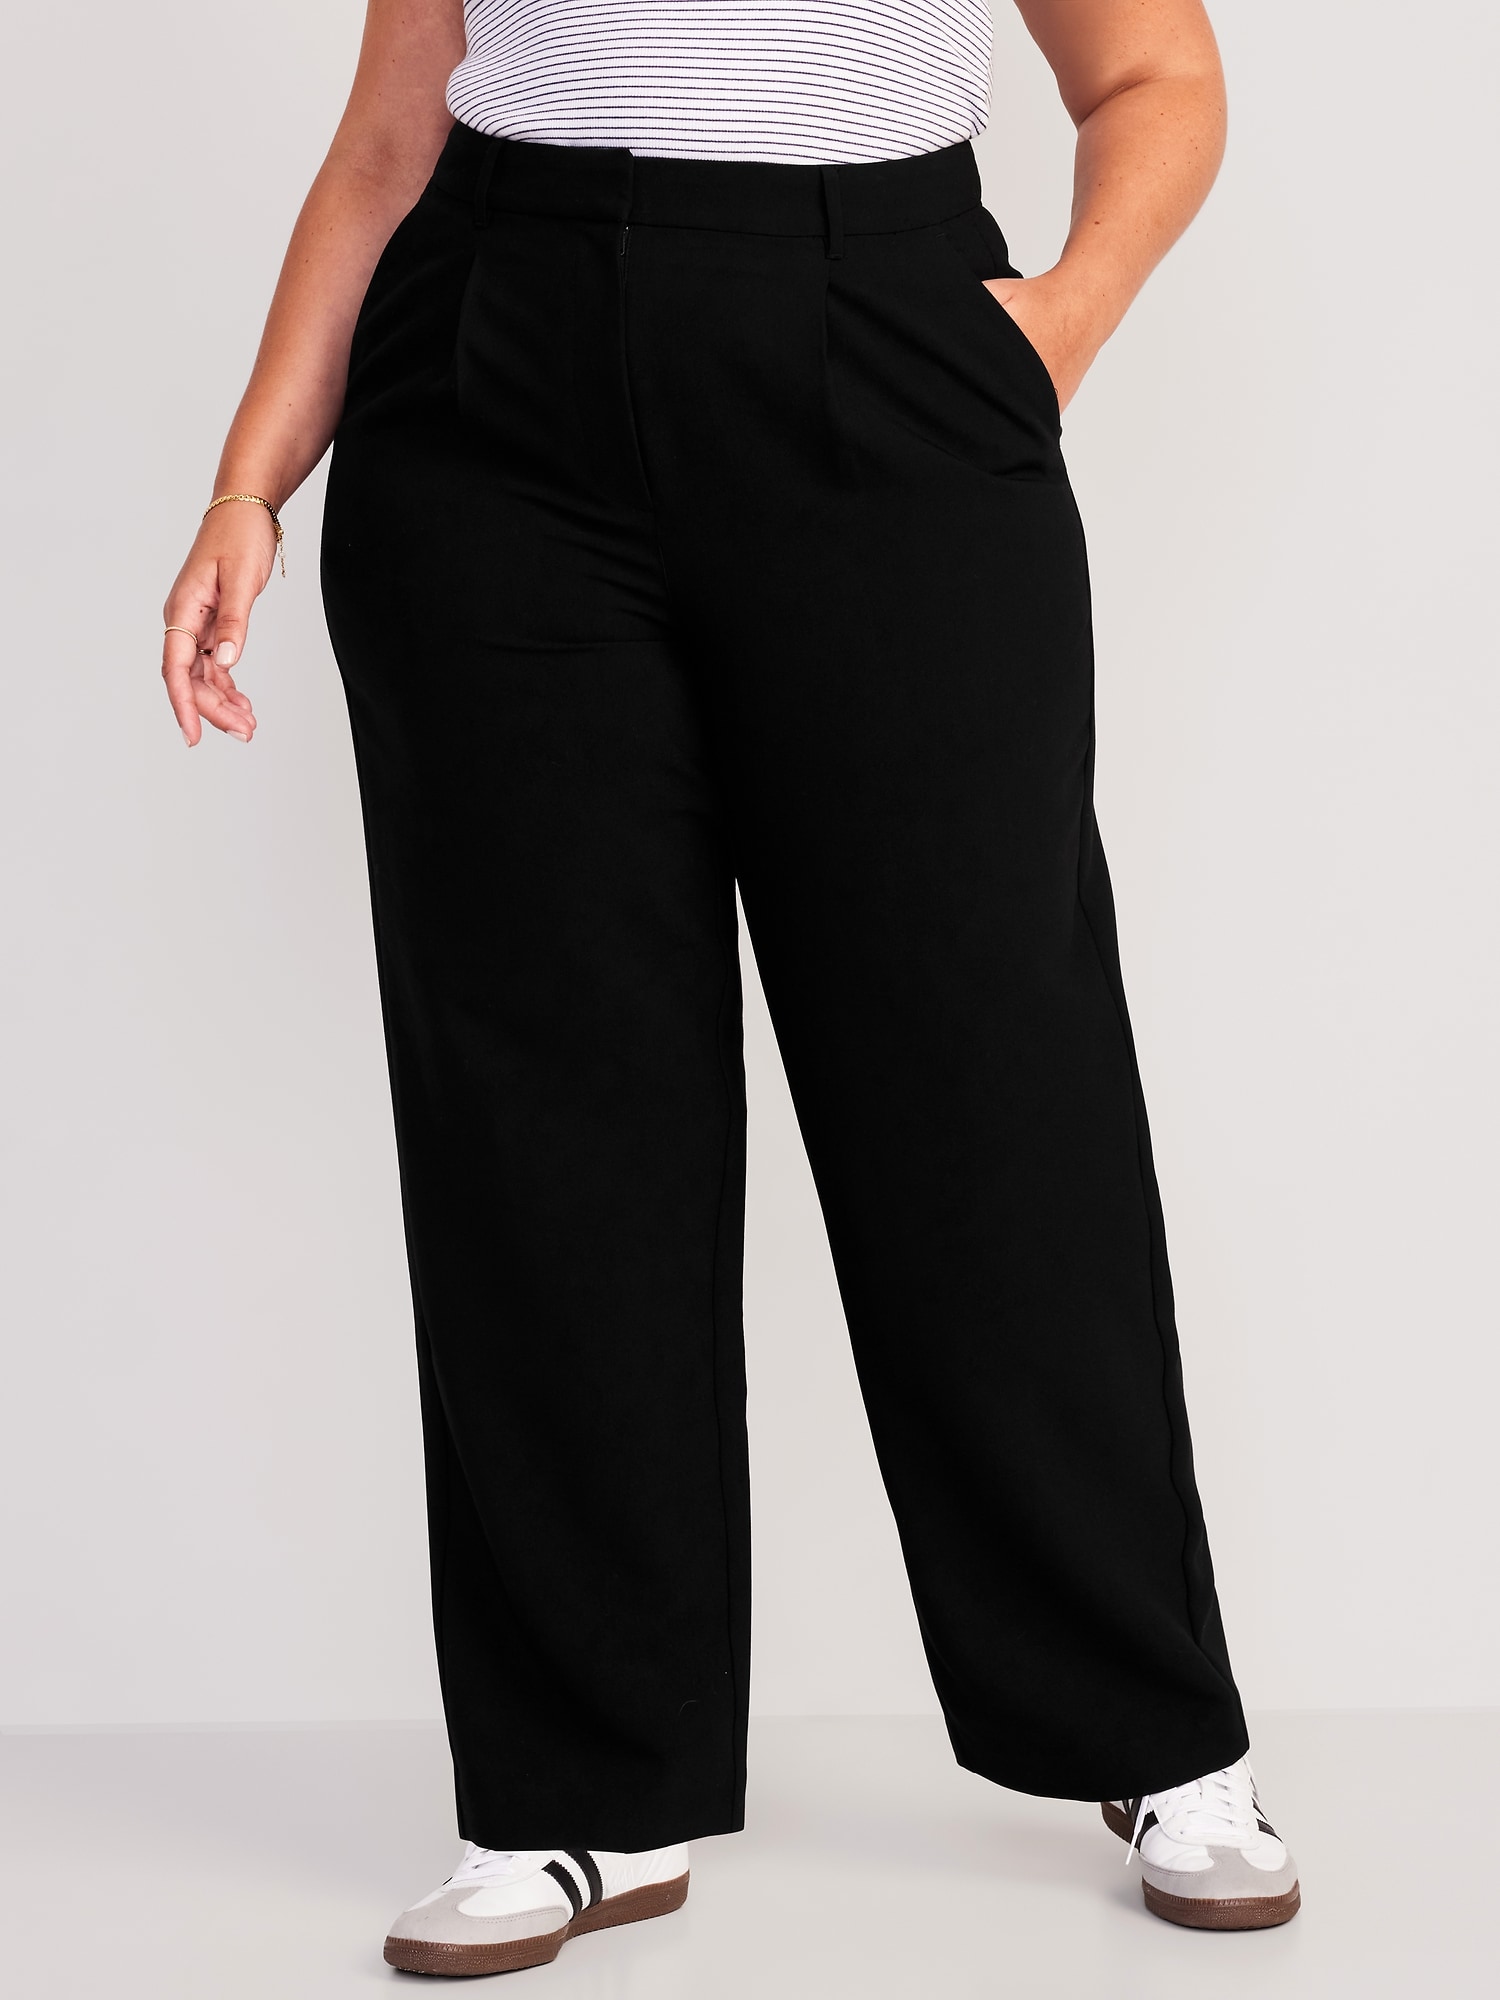 Shop Vintage Trousers Pants Women with great discounts and prices